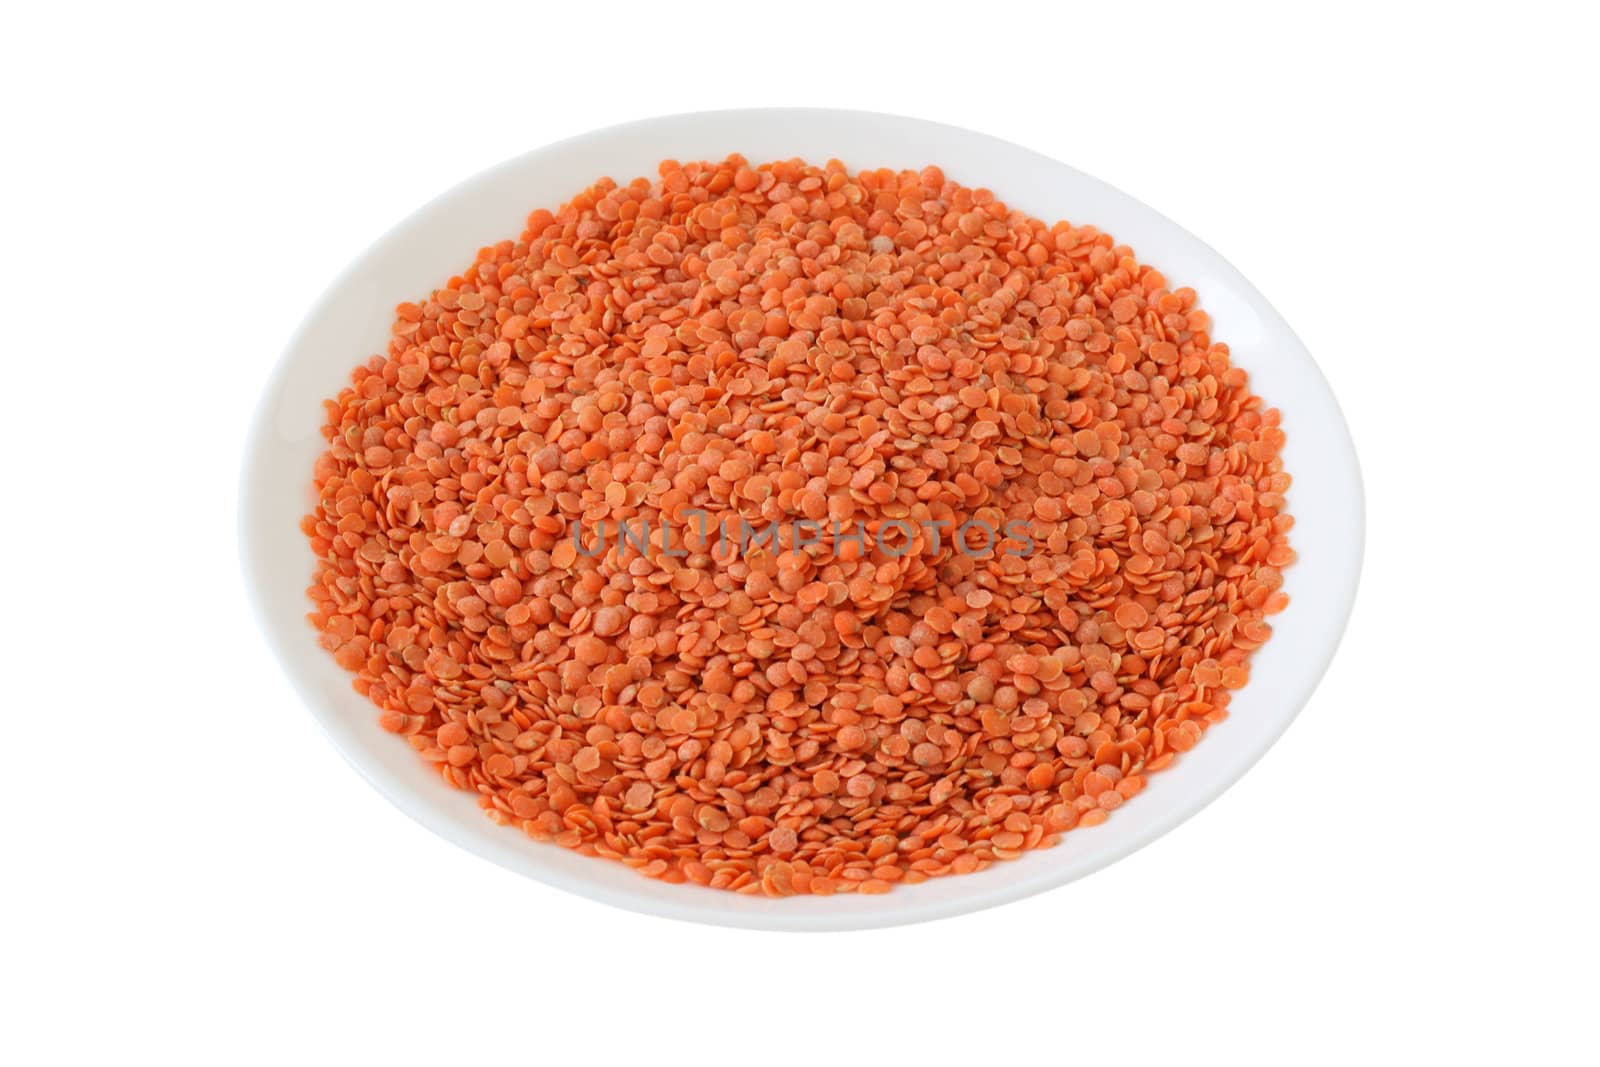 red lentil on a plate